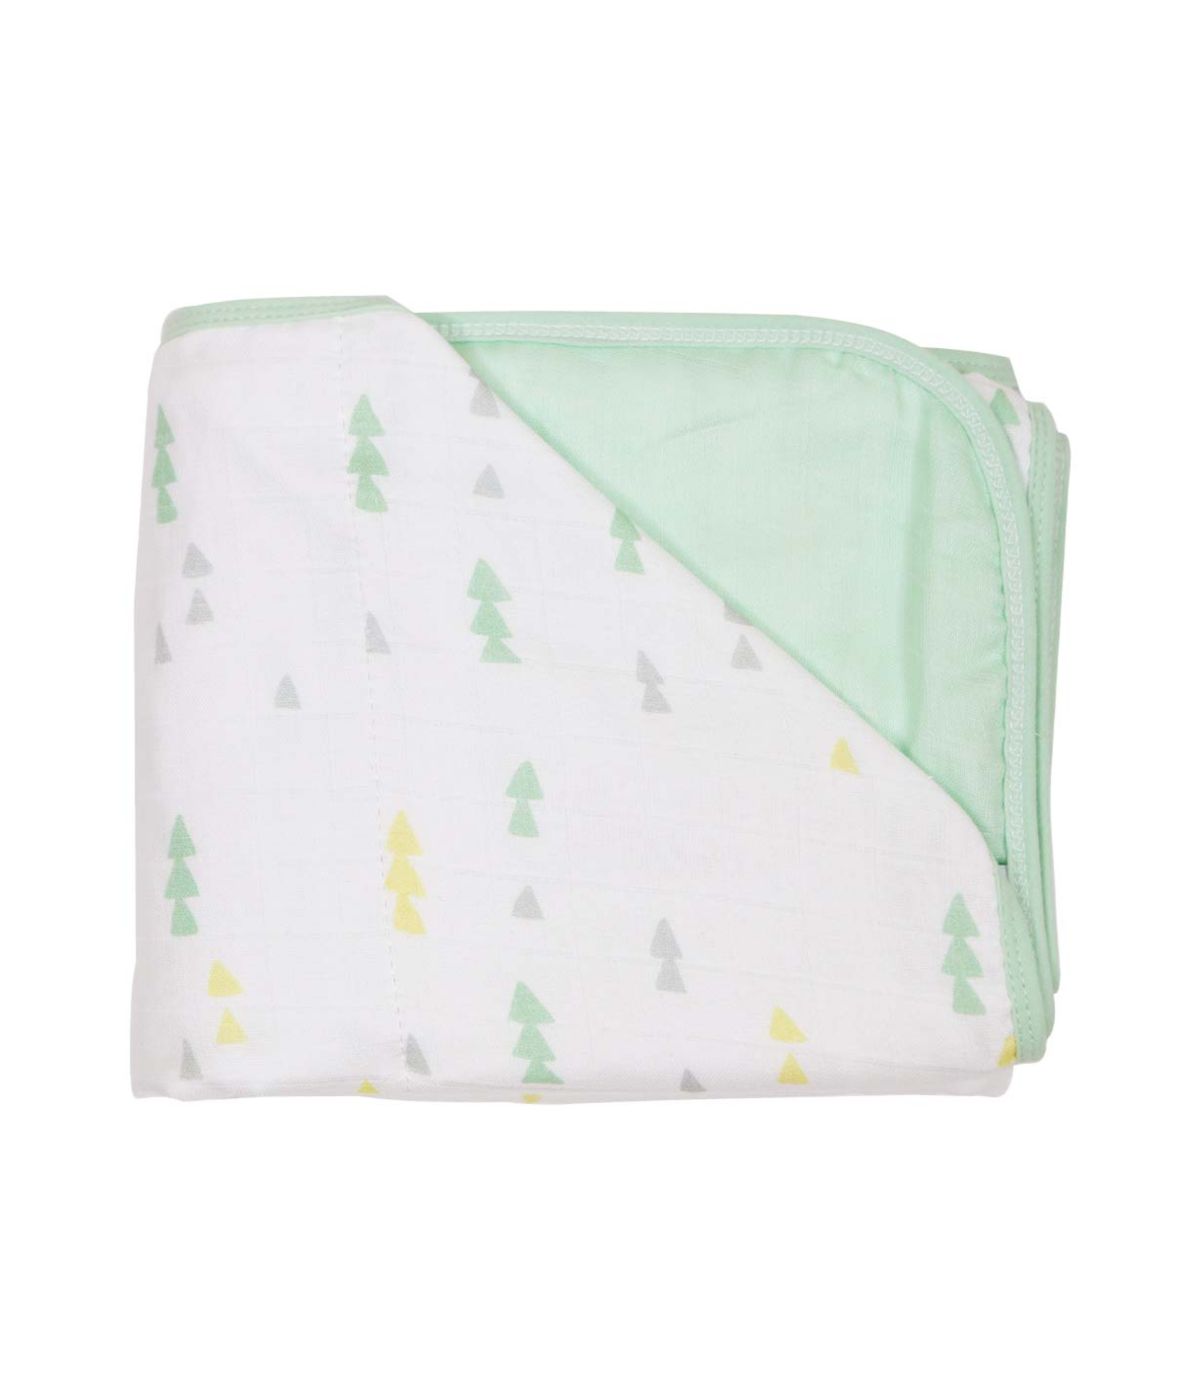 Triangles Yellow and Mint Muslin Quilted Blanket Mint/Gray/Yellow